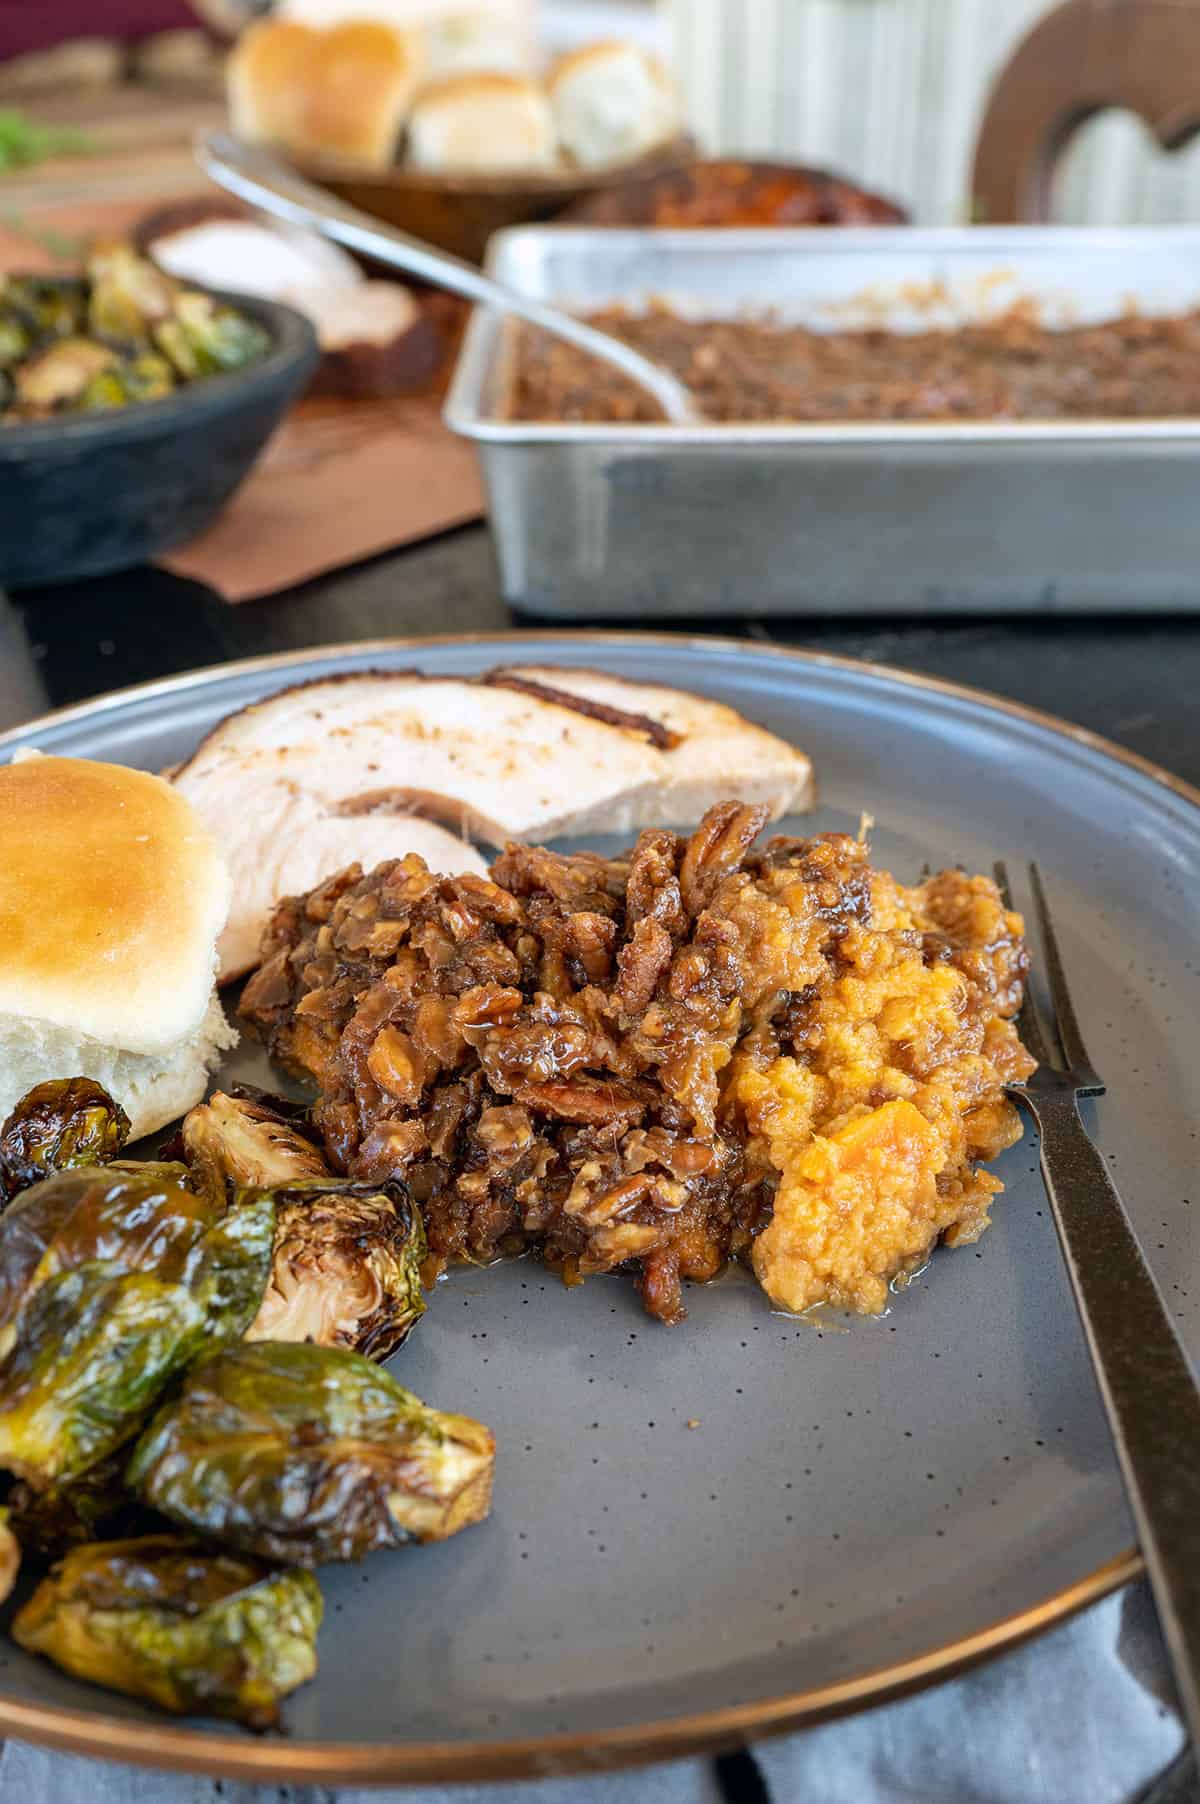 serving of sweet potato casserole on plate with turkey and brussels sprouts.